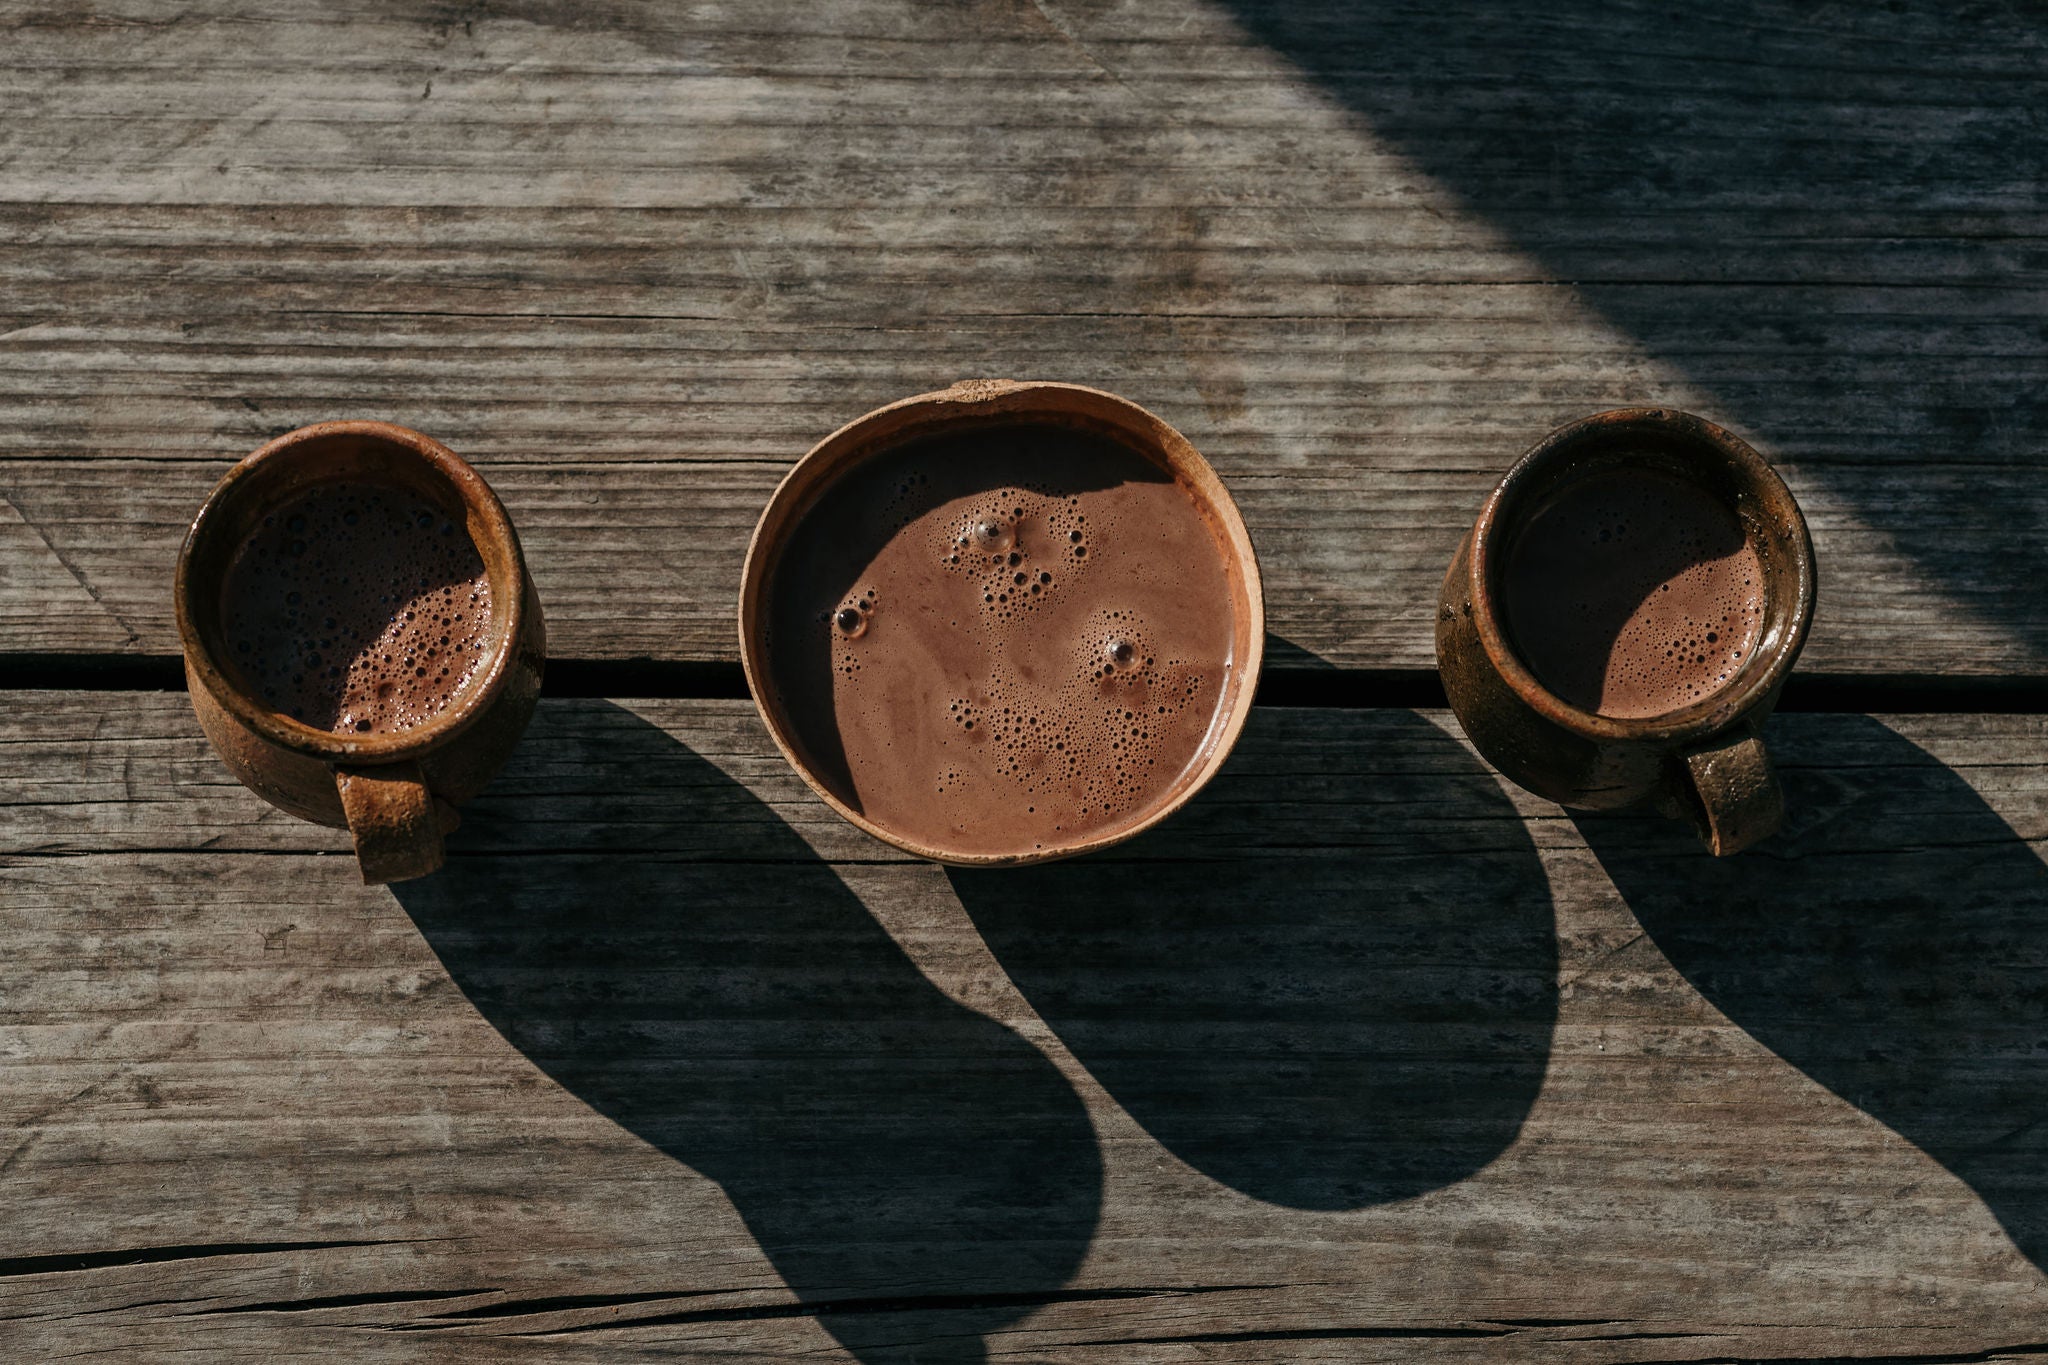 3 cups of Ceremonial Cacao